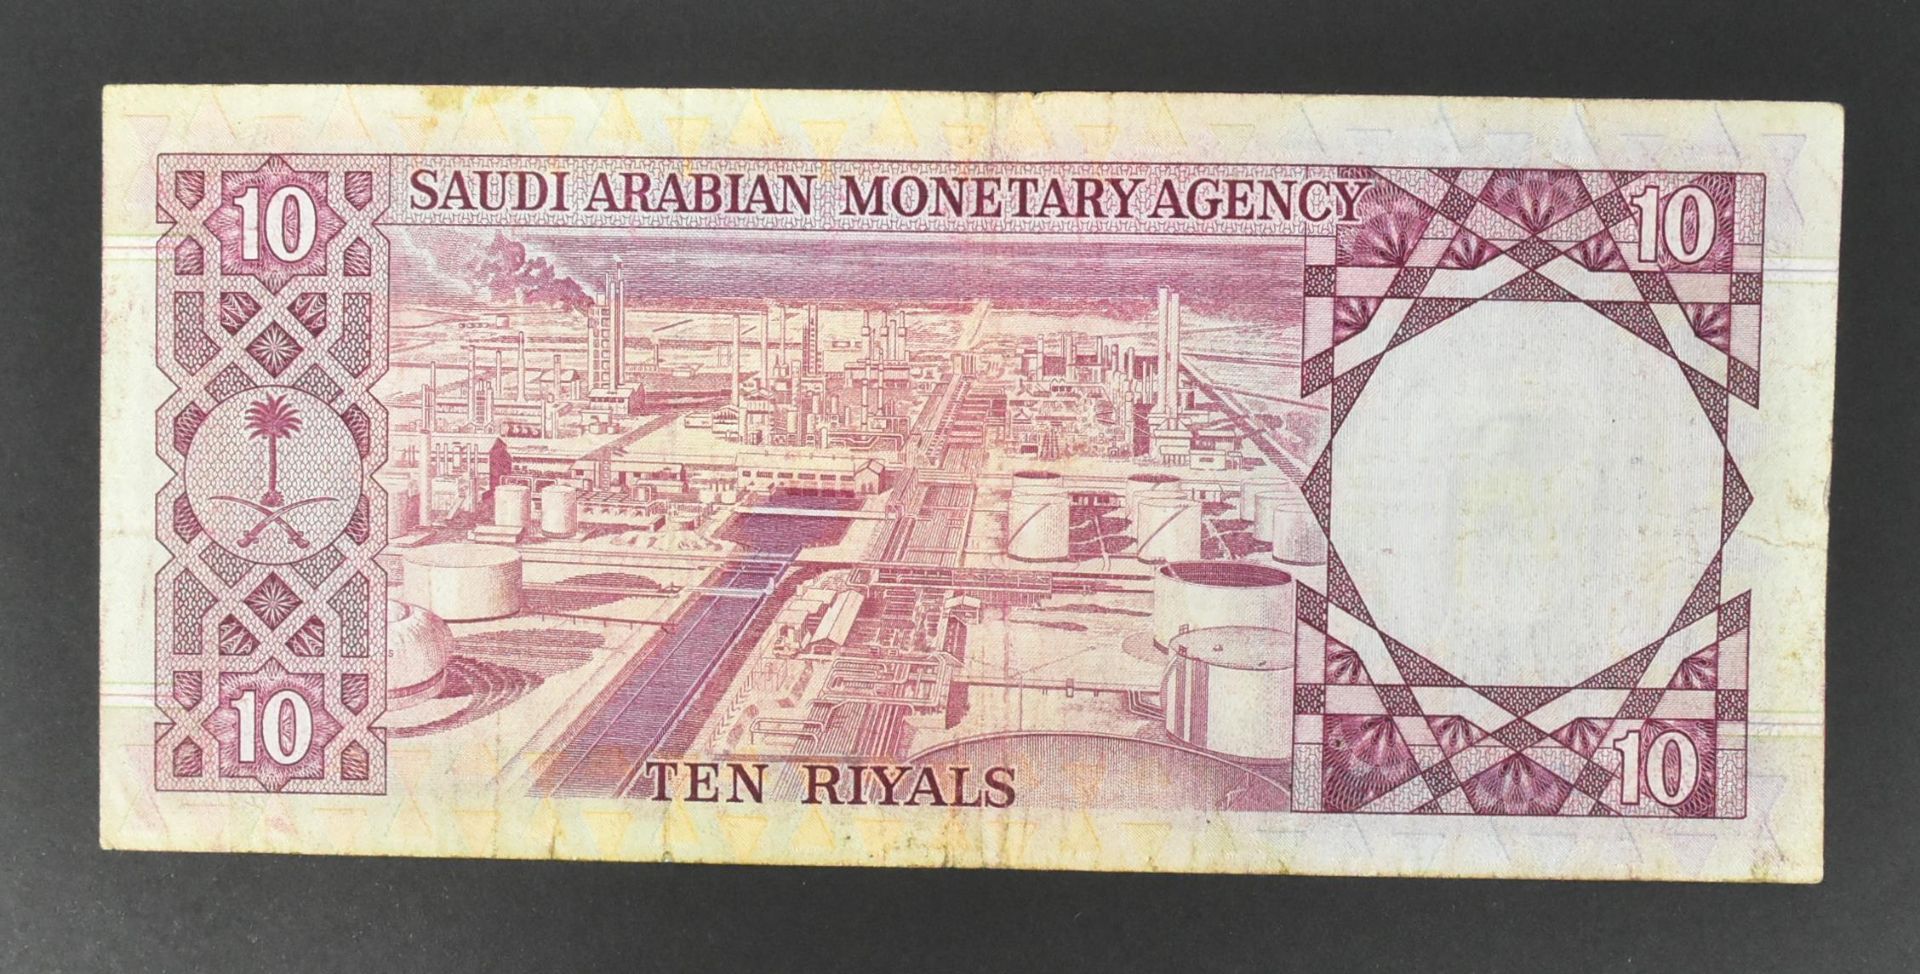 COLLECTION OF INTERNATIONAL UNCIRCULATED BANK NOTES - OMAN - Image 30 of 51